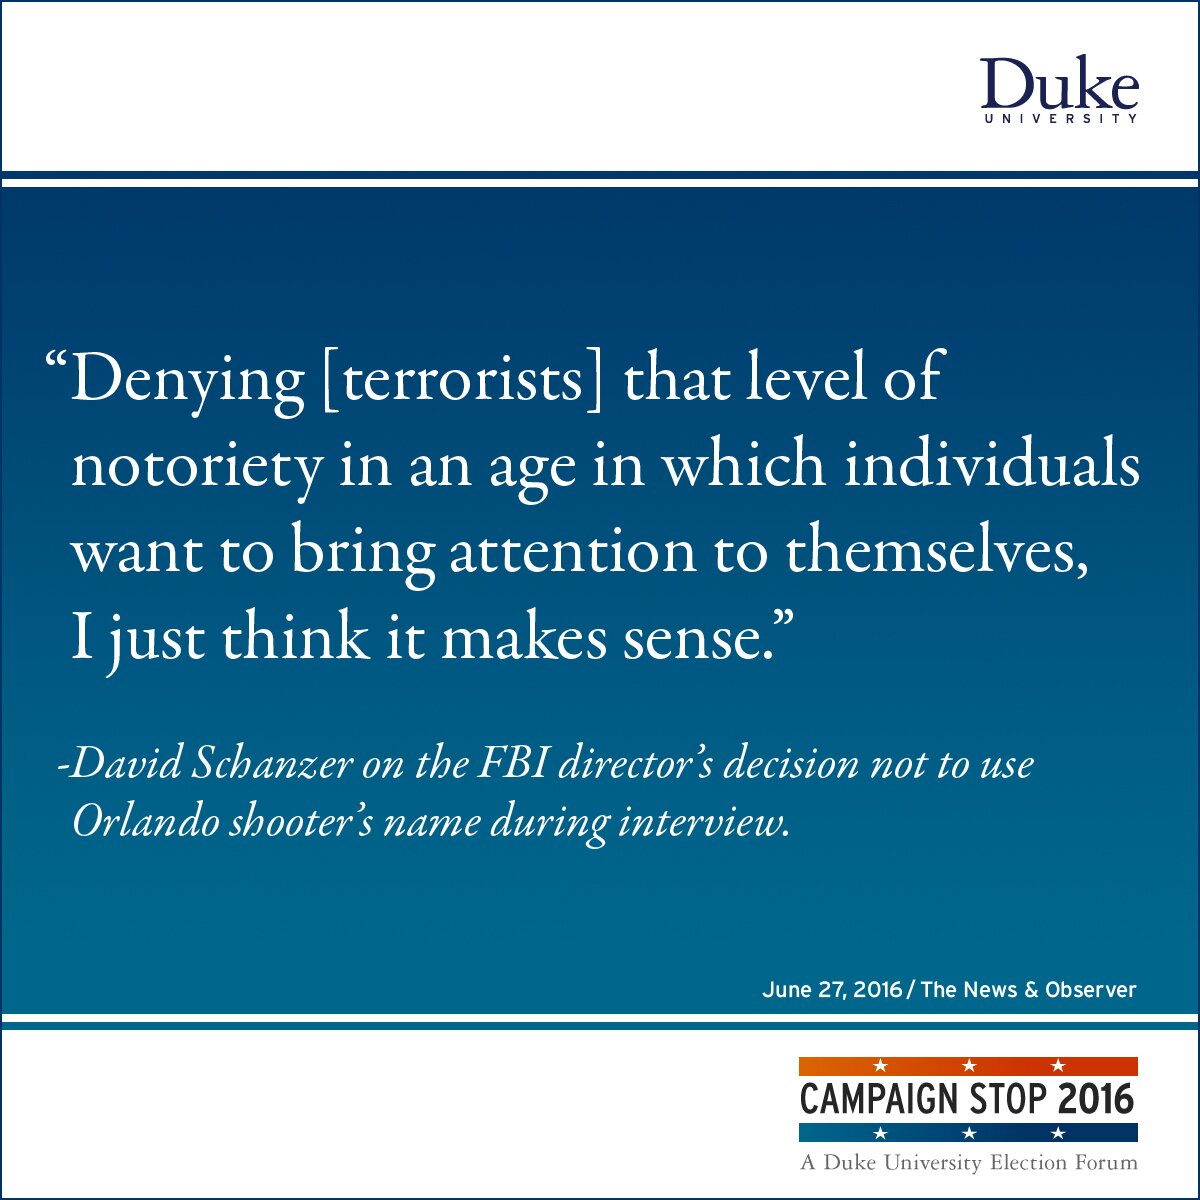 “Denying [terrorists] that level of notoriety in an age in which individuals want to bring attention to themselves, I just think it makes sense.” -David Schanzer on the FBI director’s decision not to use Orlando shooter’s name during interview.